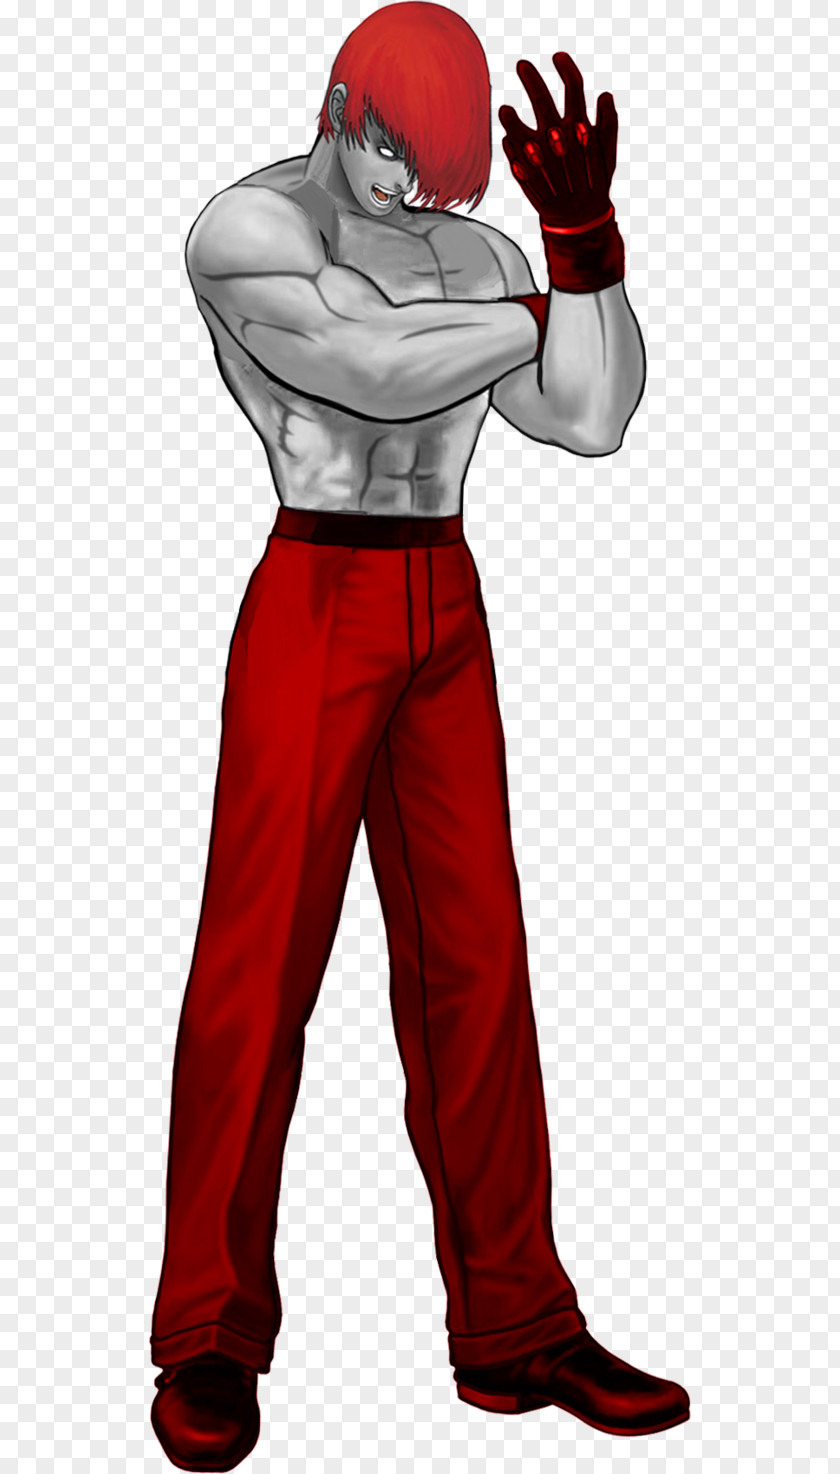 King The Of Fighters '98 XIII 2001 Rugal Bernstein Kyo Kusanagi PNG